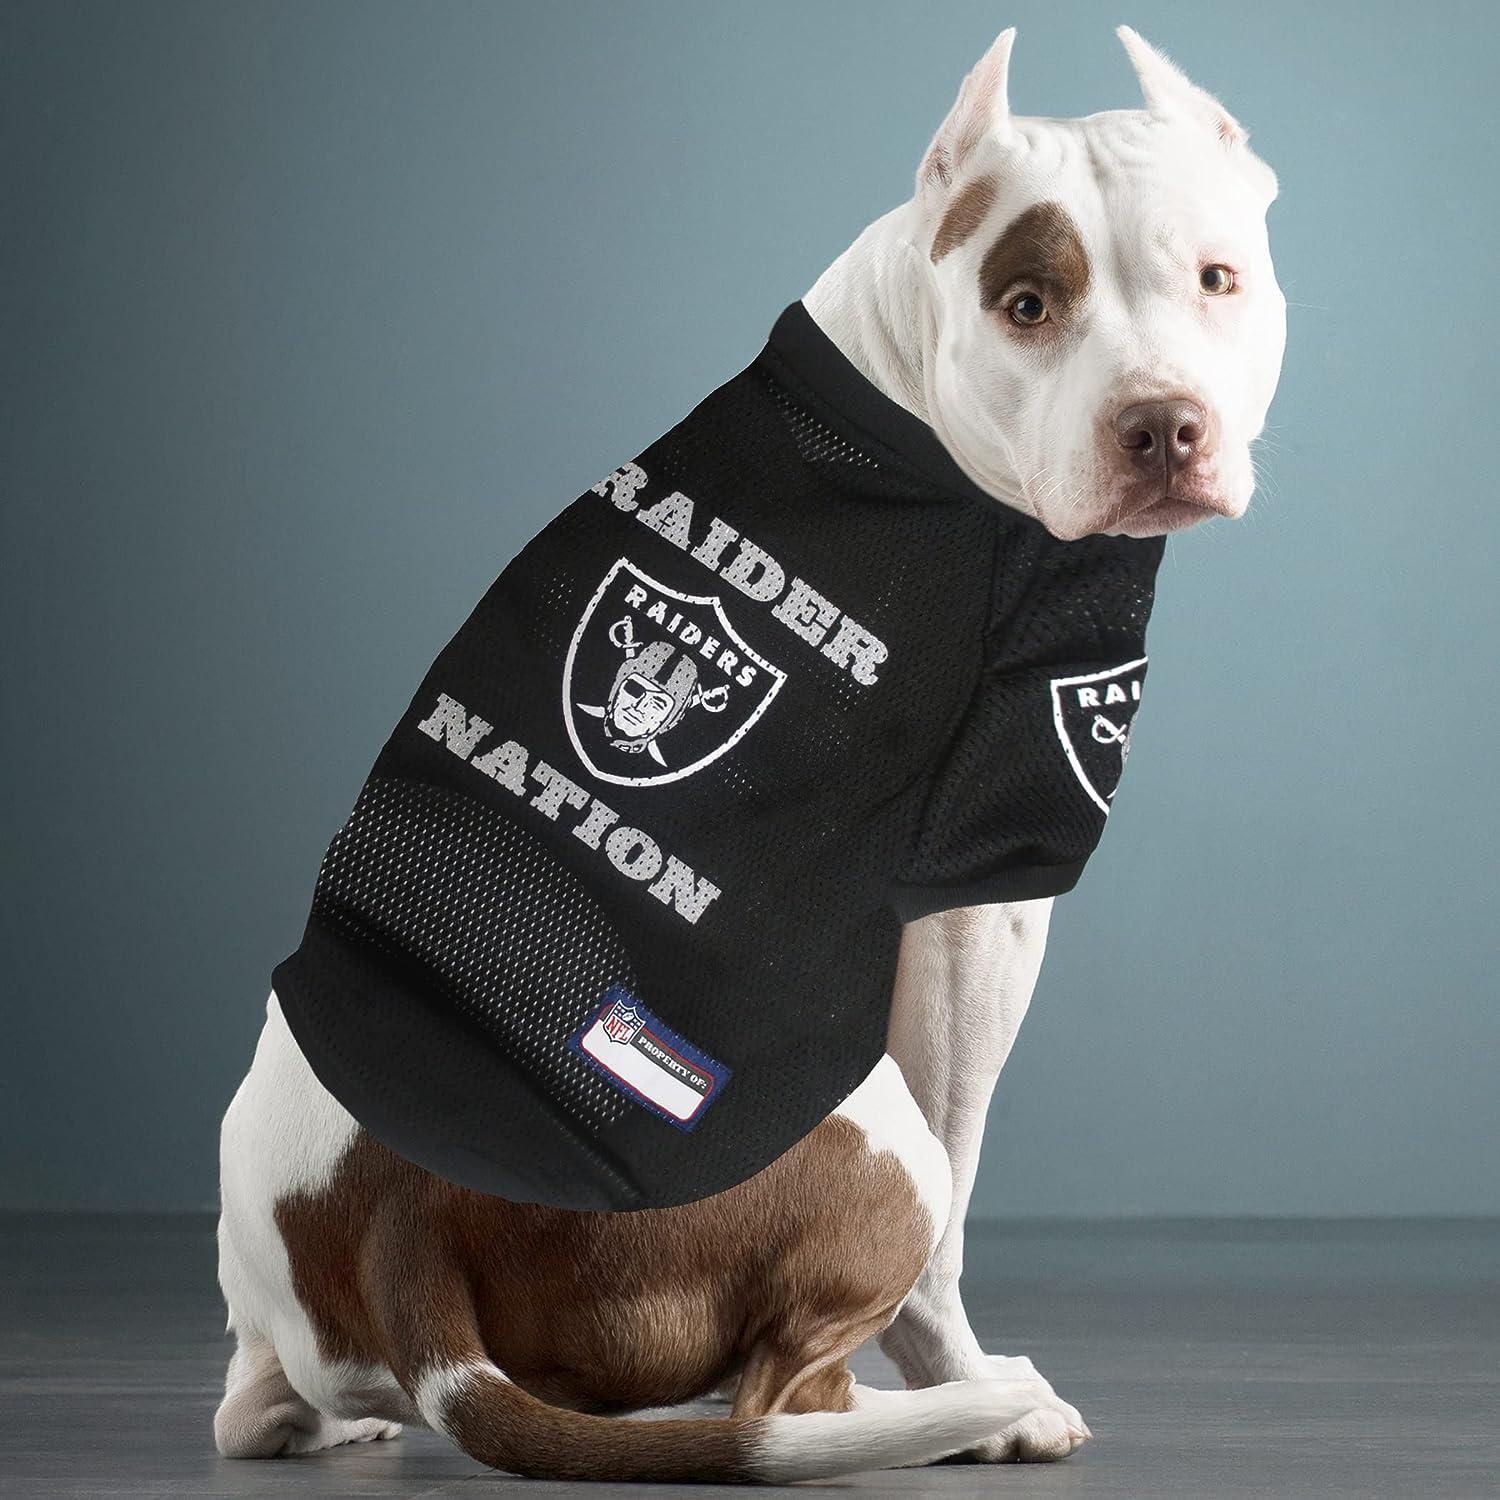 NFL JERSEY - The new PREMIUM RAGLAN PERFORMANCE JERSEY for DOGS & CATS.  MESH JERSEY for pets One Size Multi